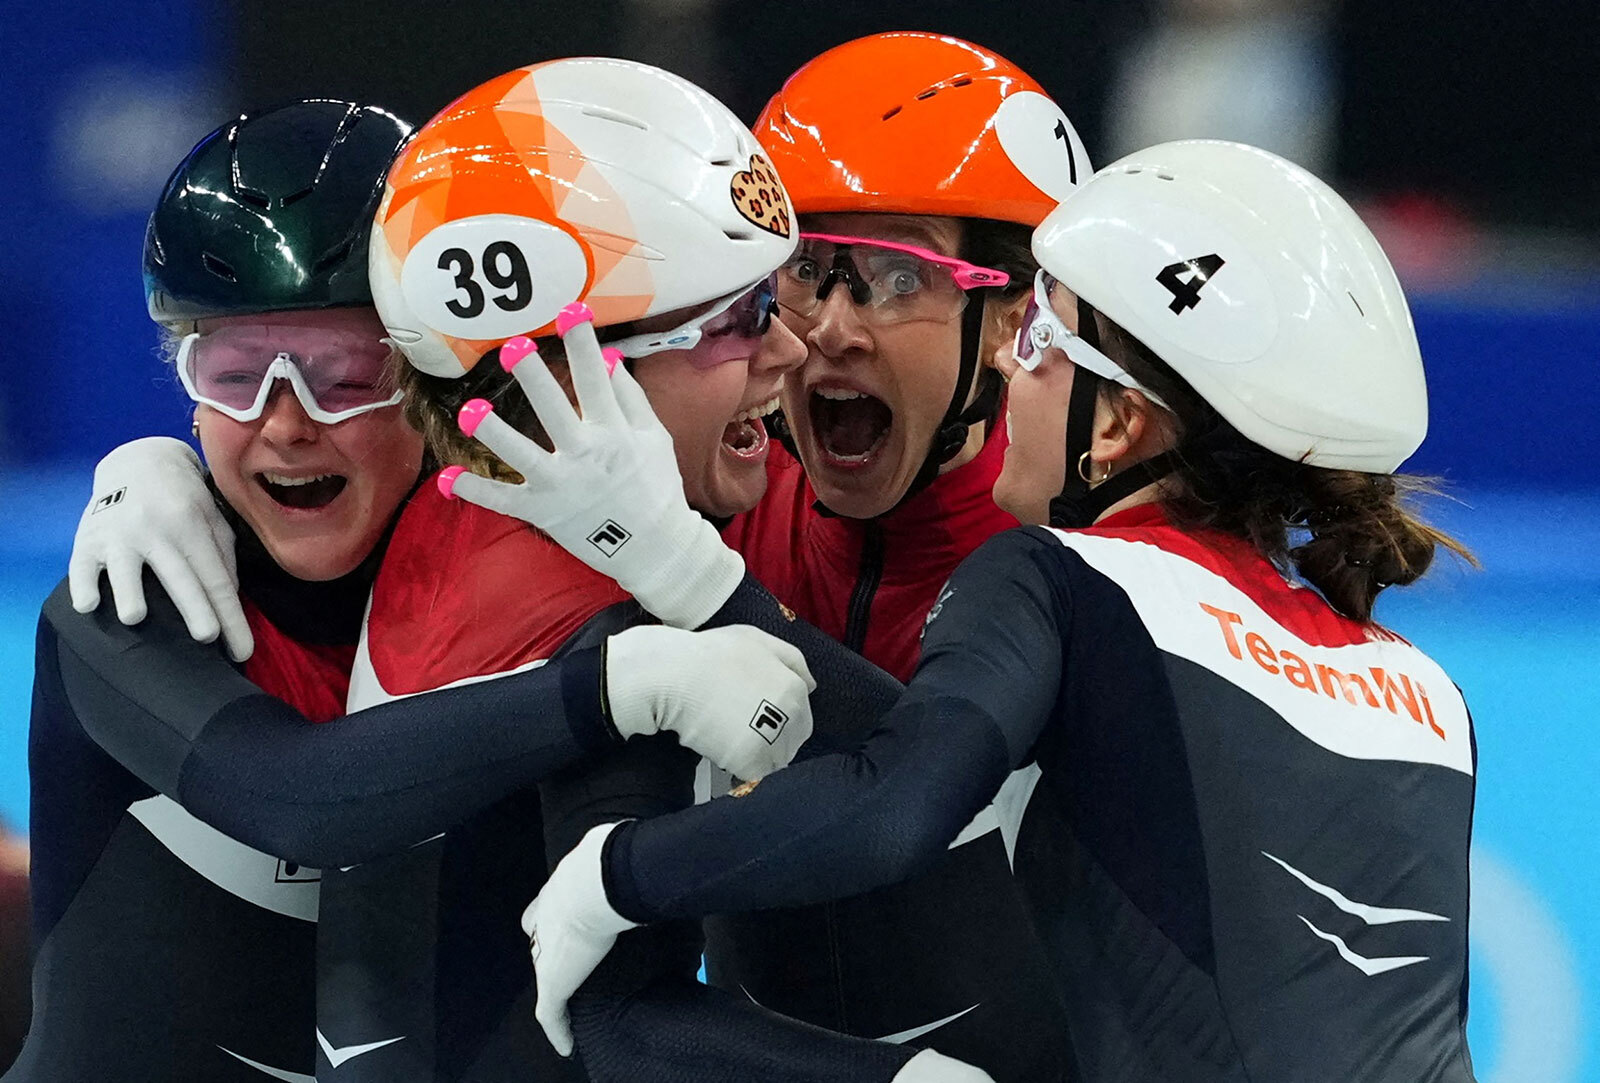 Dutch speed skaters Xandra Velzeboer, Suzanne Schulting, Selma Poutsma and Yara Van Kerkhof celebrate their gold medal in the 3,000m short track relay on February 13, setting an Olympic record in the race.